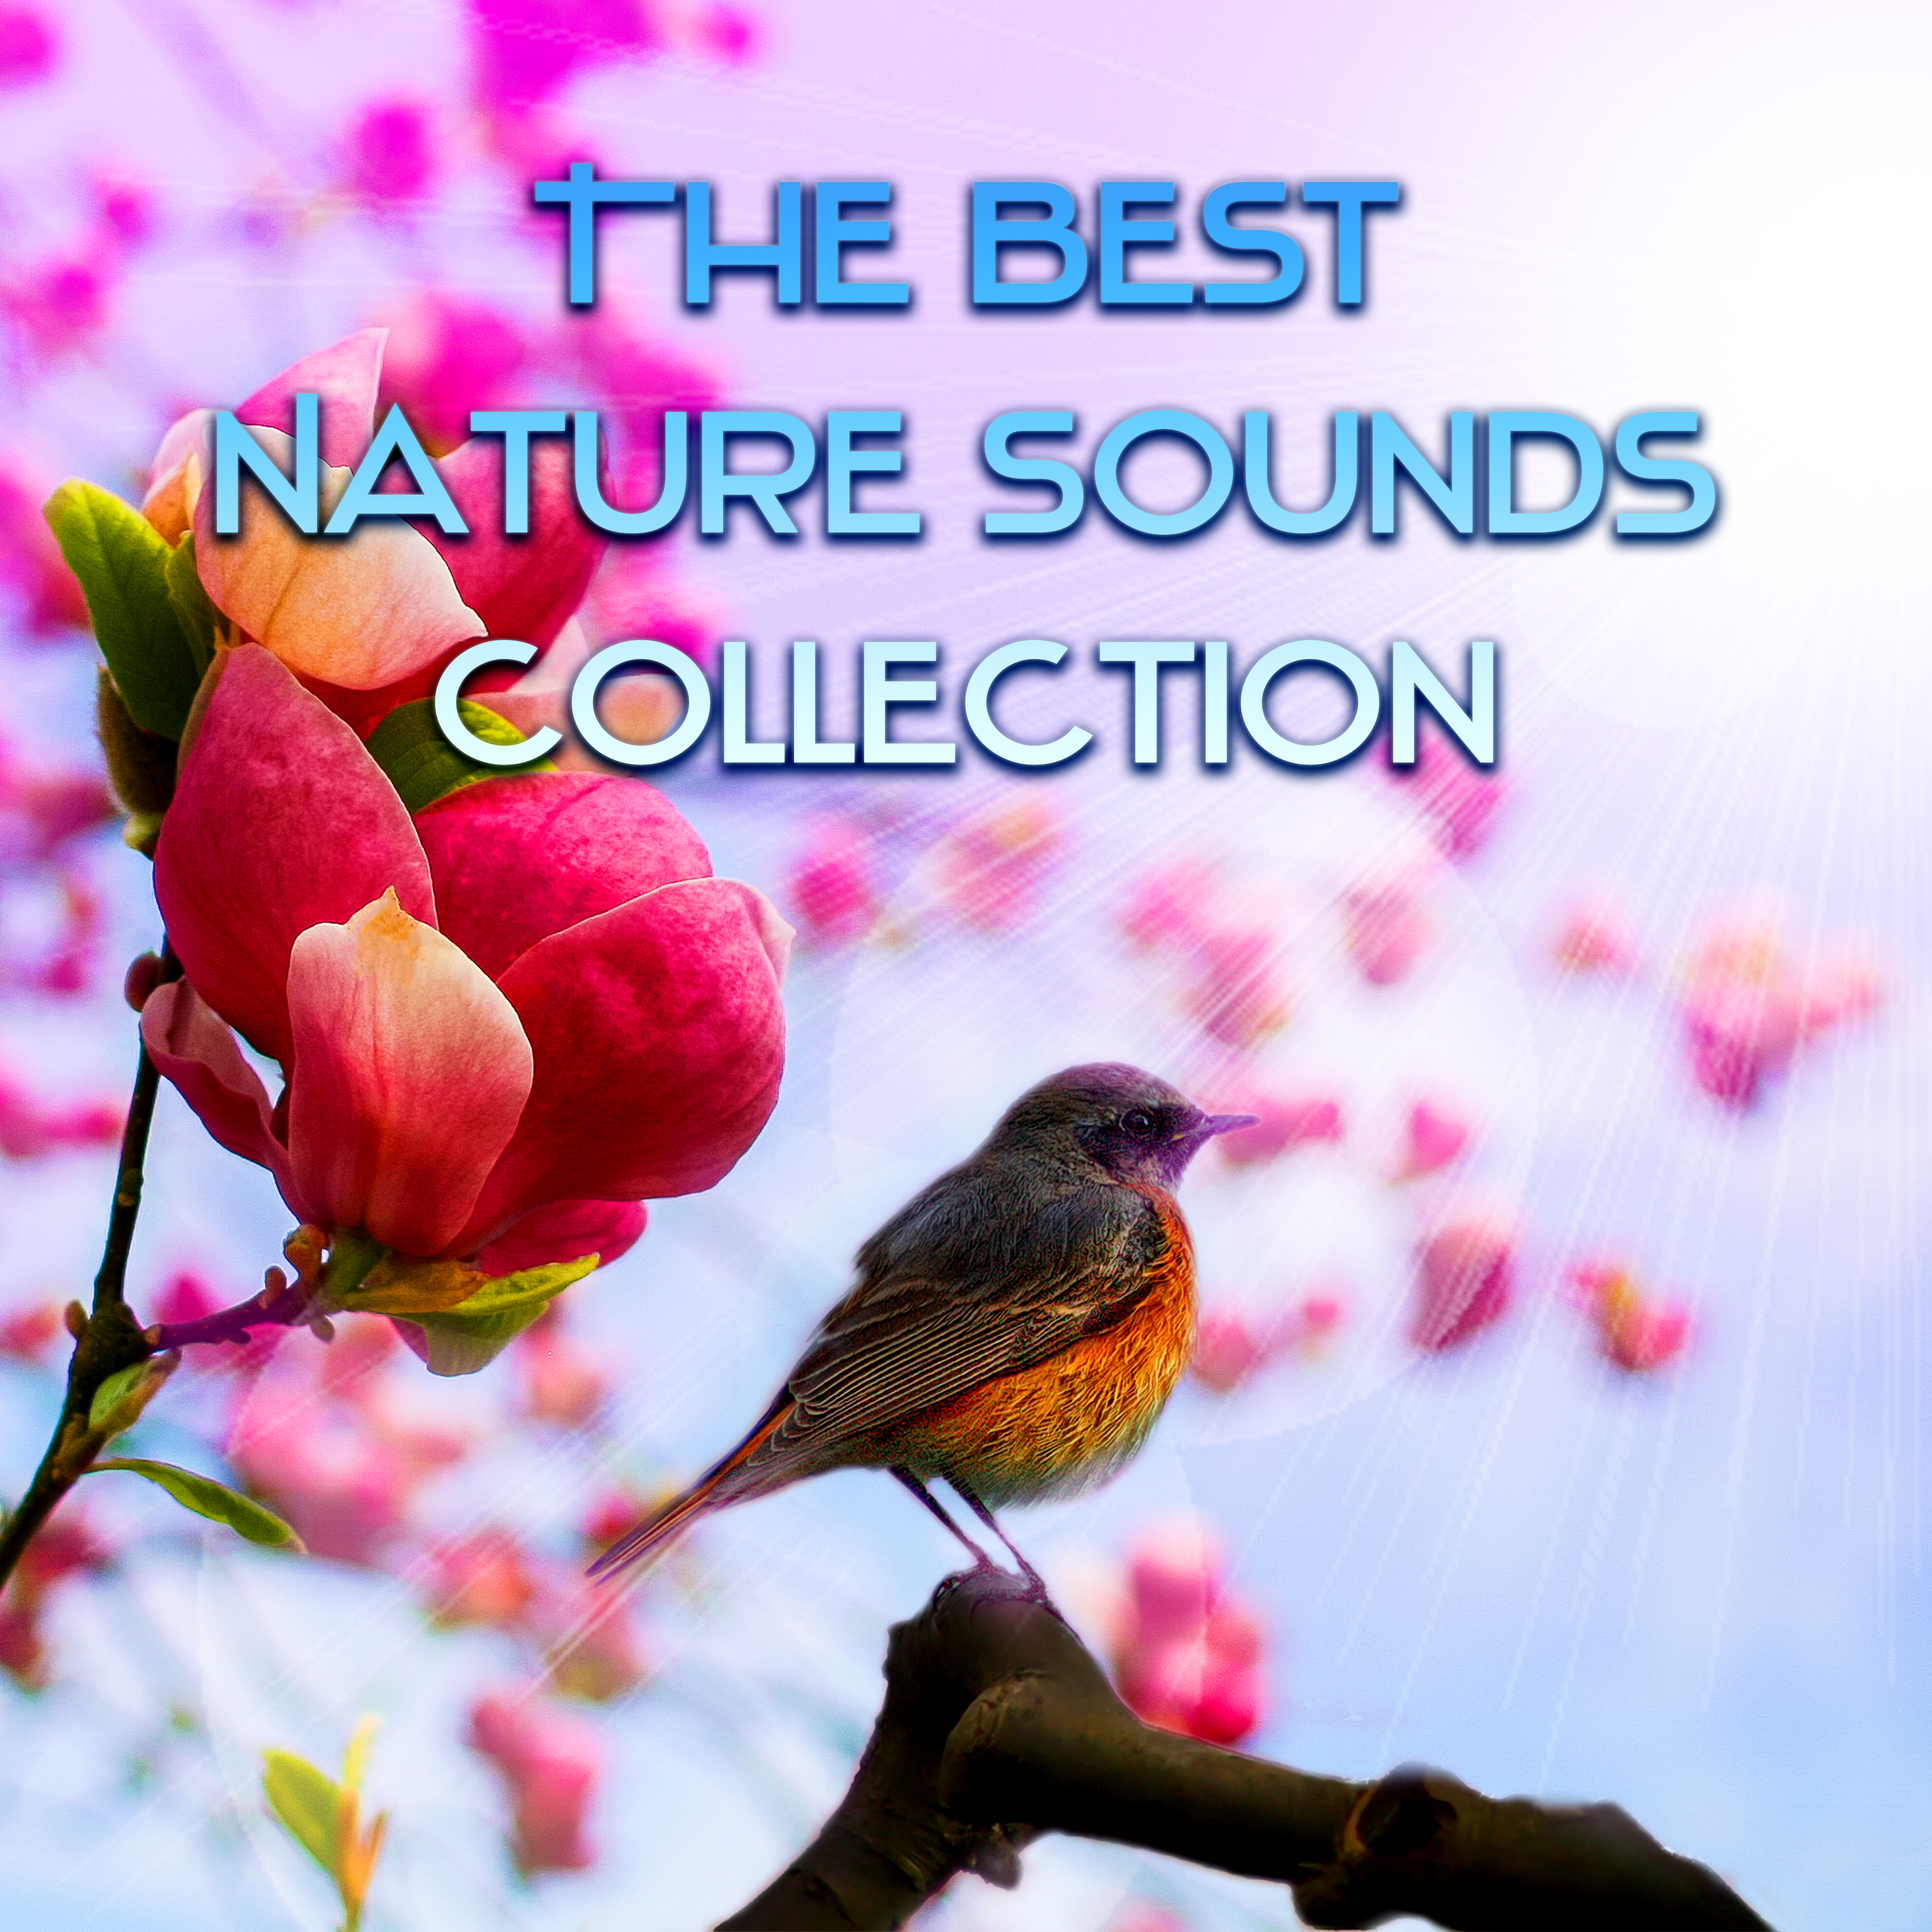 The Best Nature Sounds Collection – Ocean Sounds, Birds for Sleep and Relaxation, Sonidos de la Naturaleza, Sons de la Nature, Water Sounds, Guitar & Piano Music